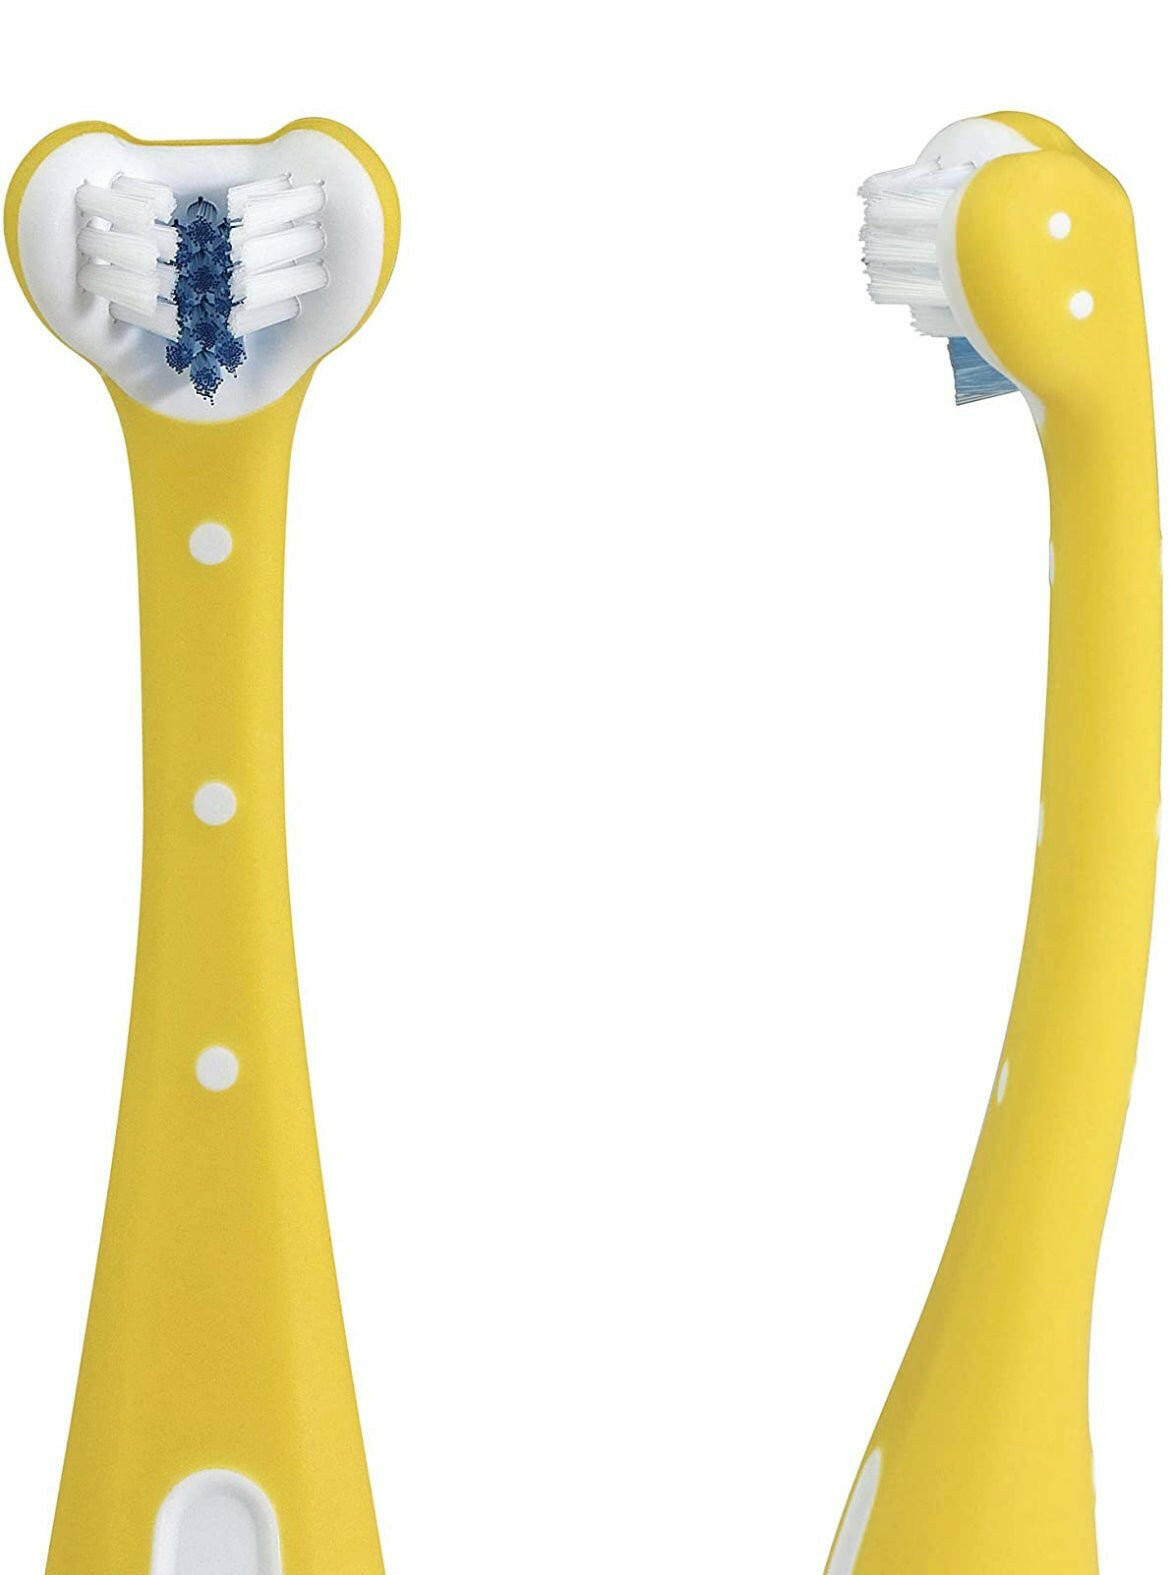 FridaBaby Triple-Angle Toothhugger Training Toothbrush for Toddler Oral Care, Yellow.